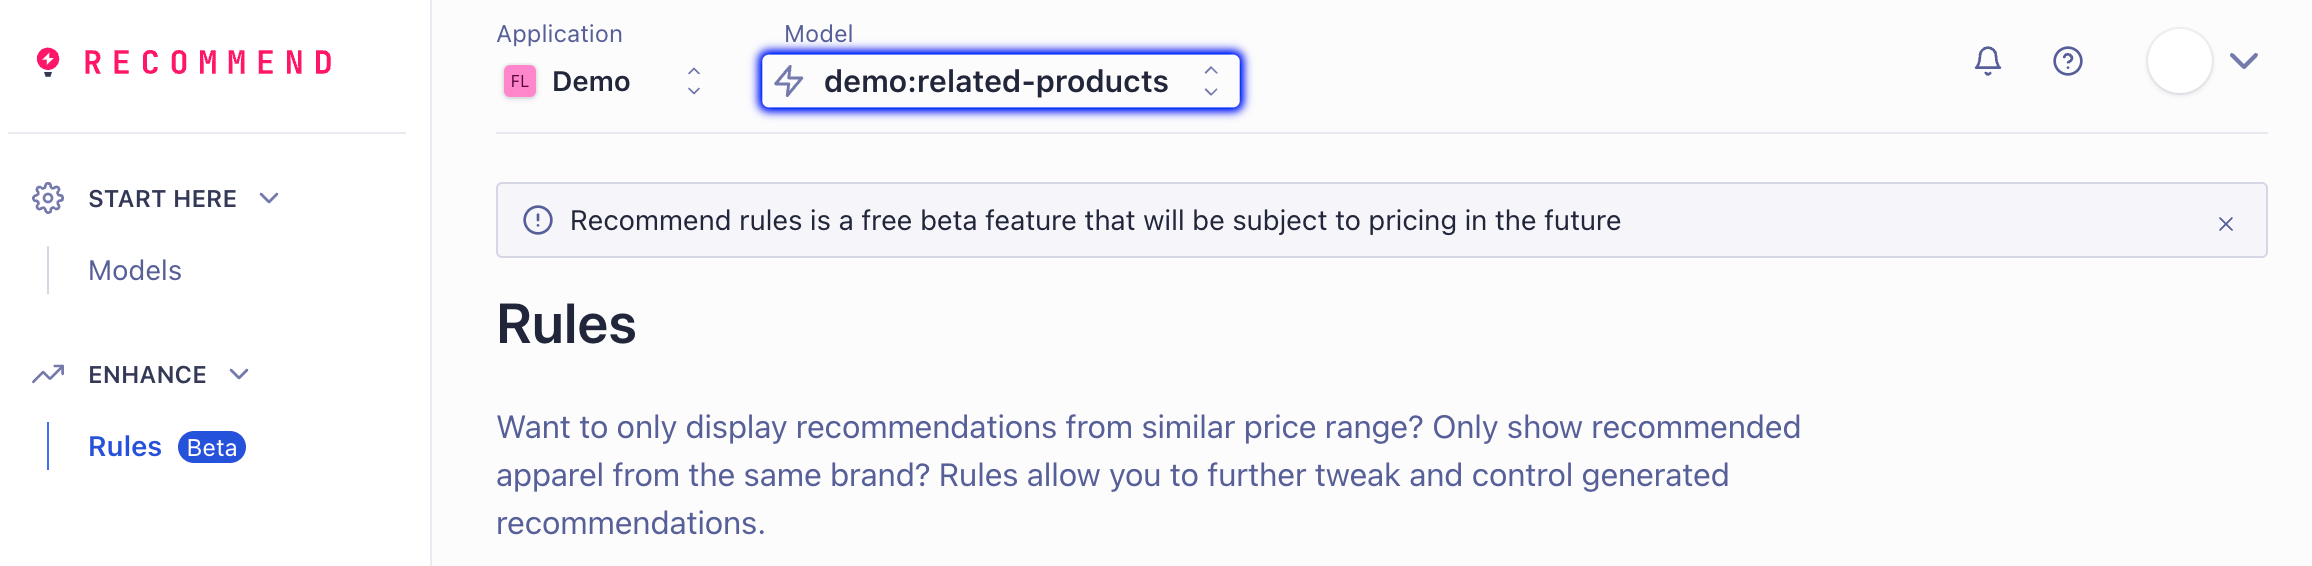 Select the trained Recommend model to which you want to apply recommendations